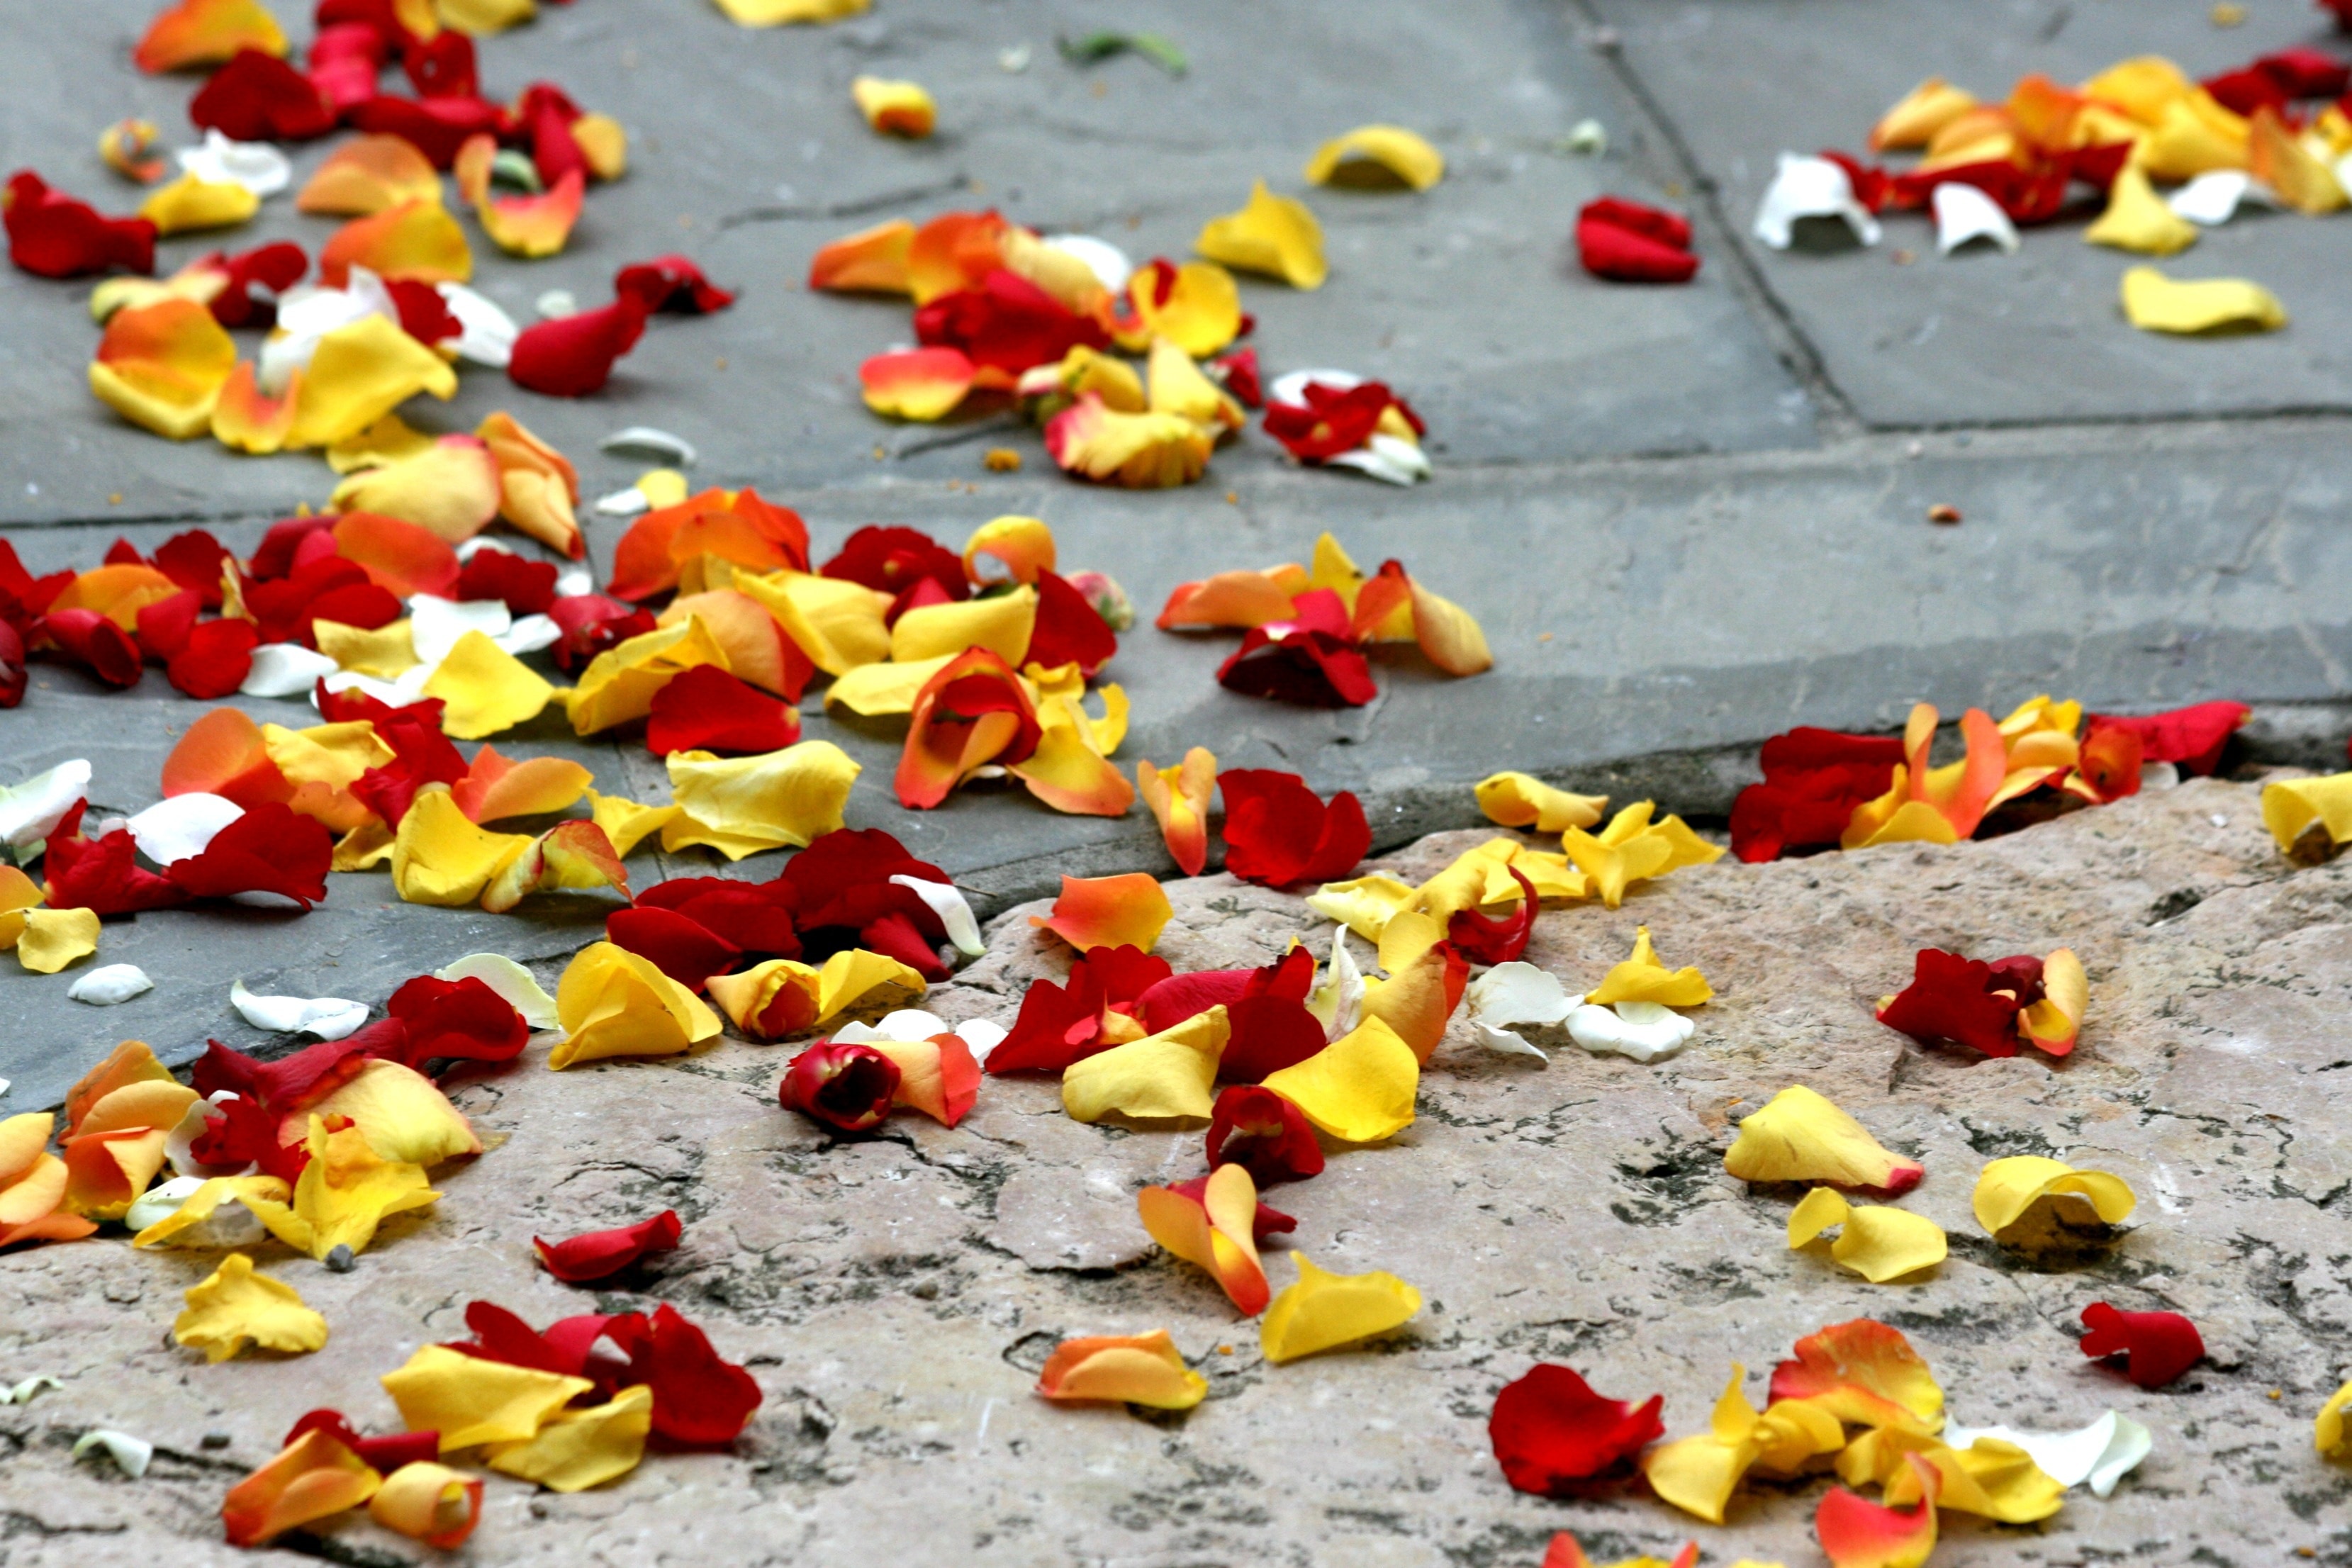 yellow, white and red flower petals on ground